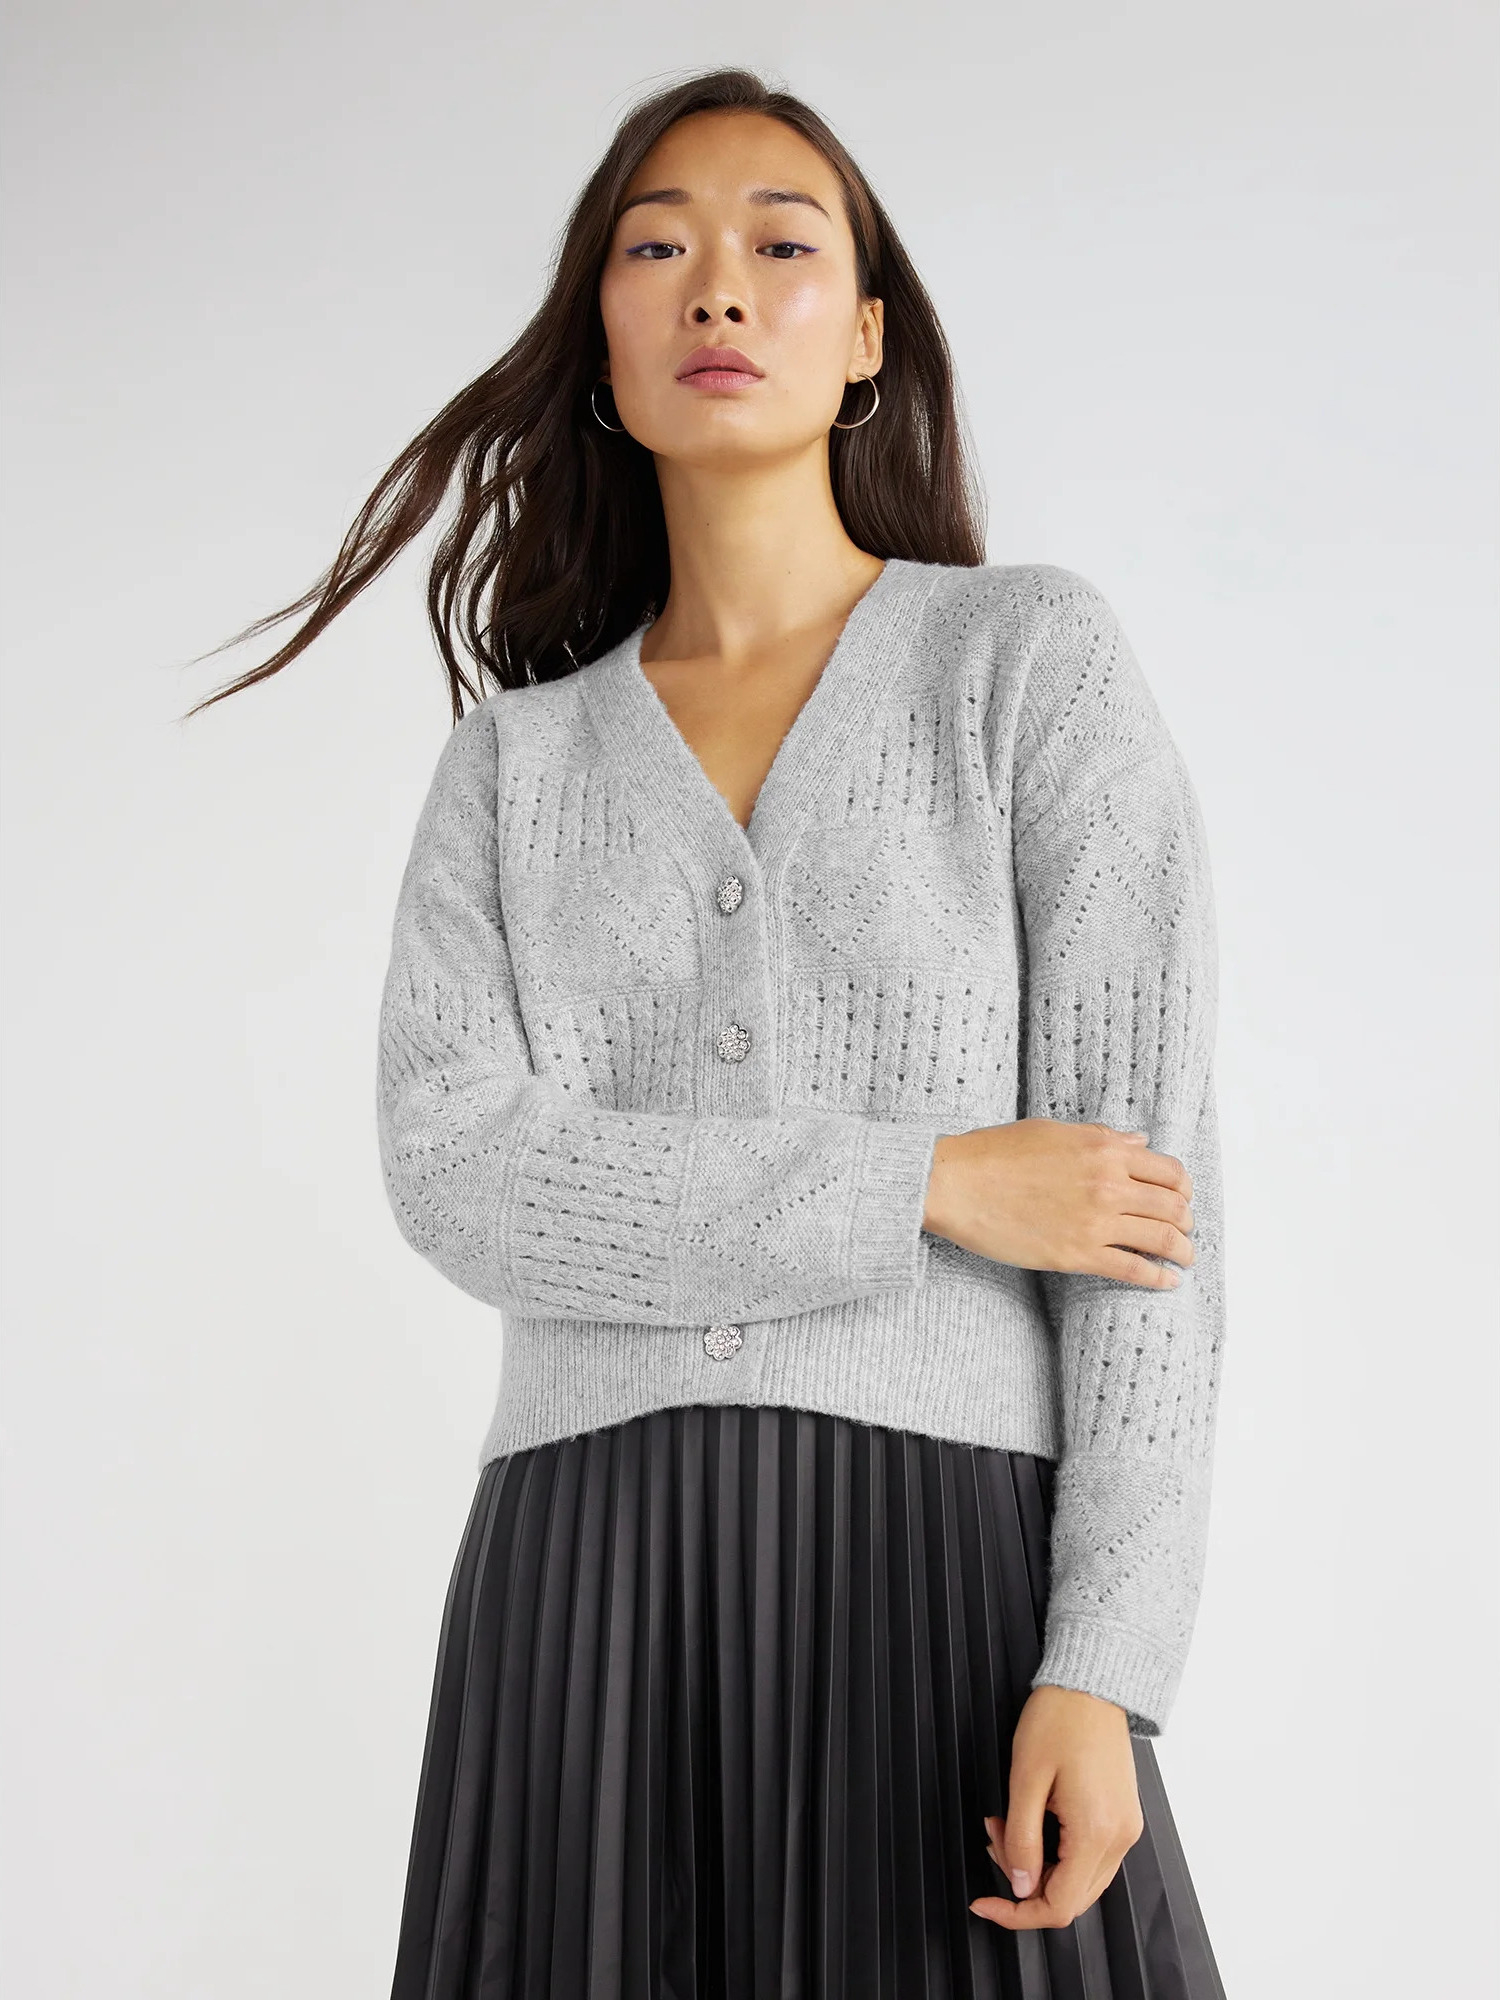 A model wearing the v-neck cardigan in light grey with a black pleated skirt